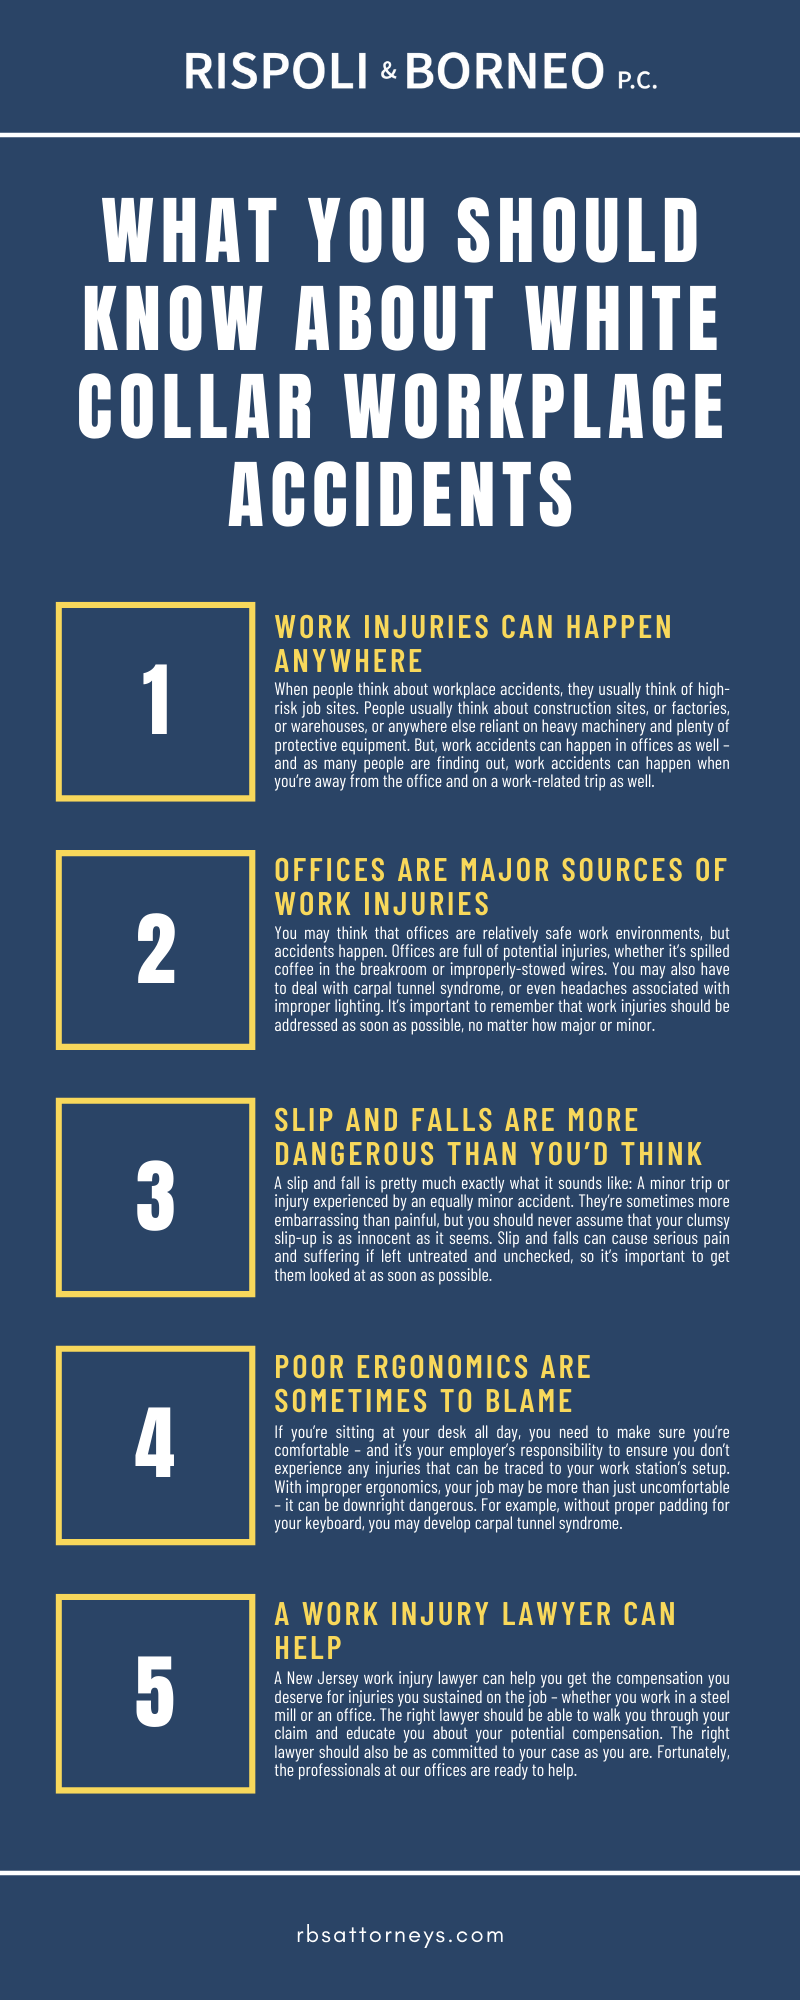 WHAT YOU SHOULD KNOW ABOUT WHITE COLLAR WORKPLACE ACCIDENTS INFOGRAPHIC